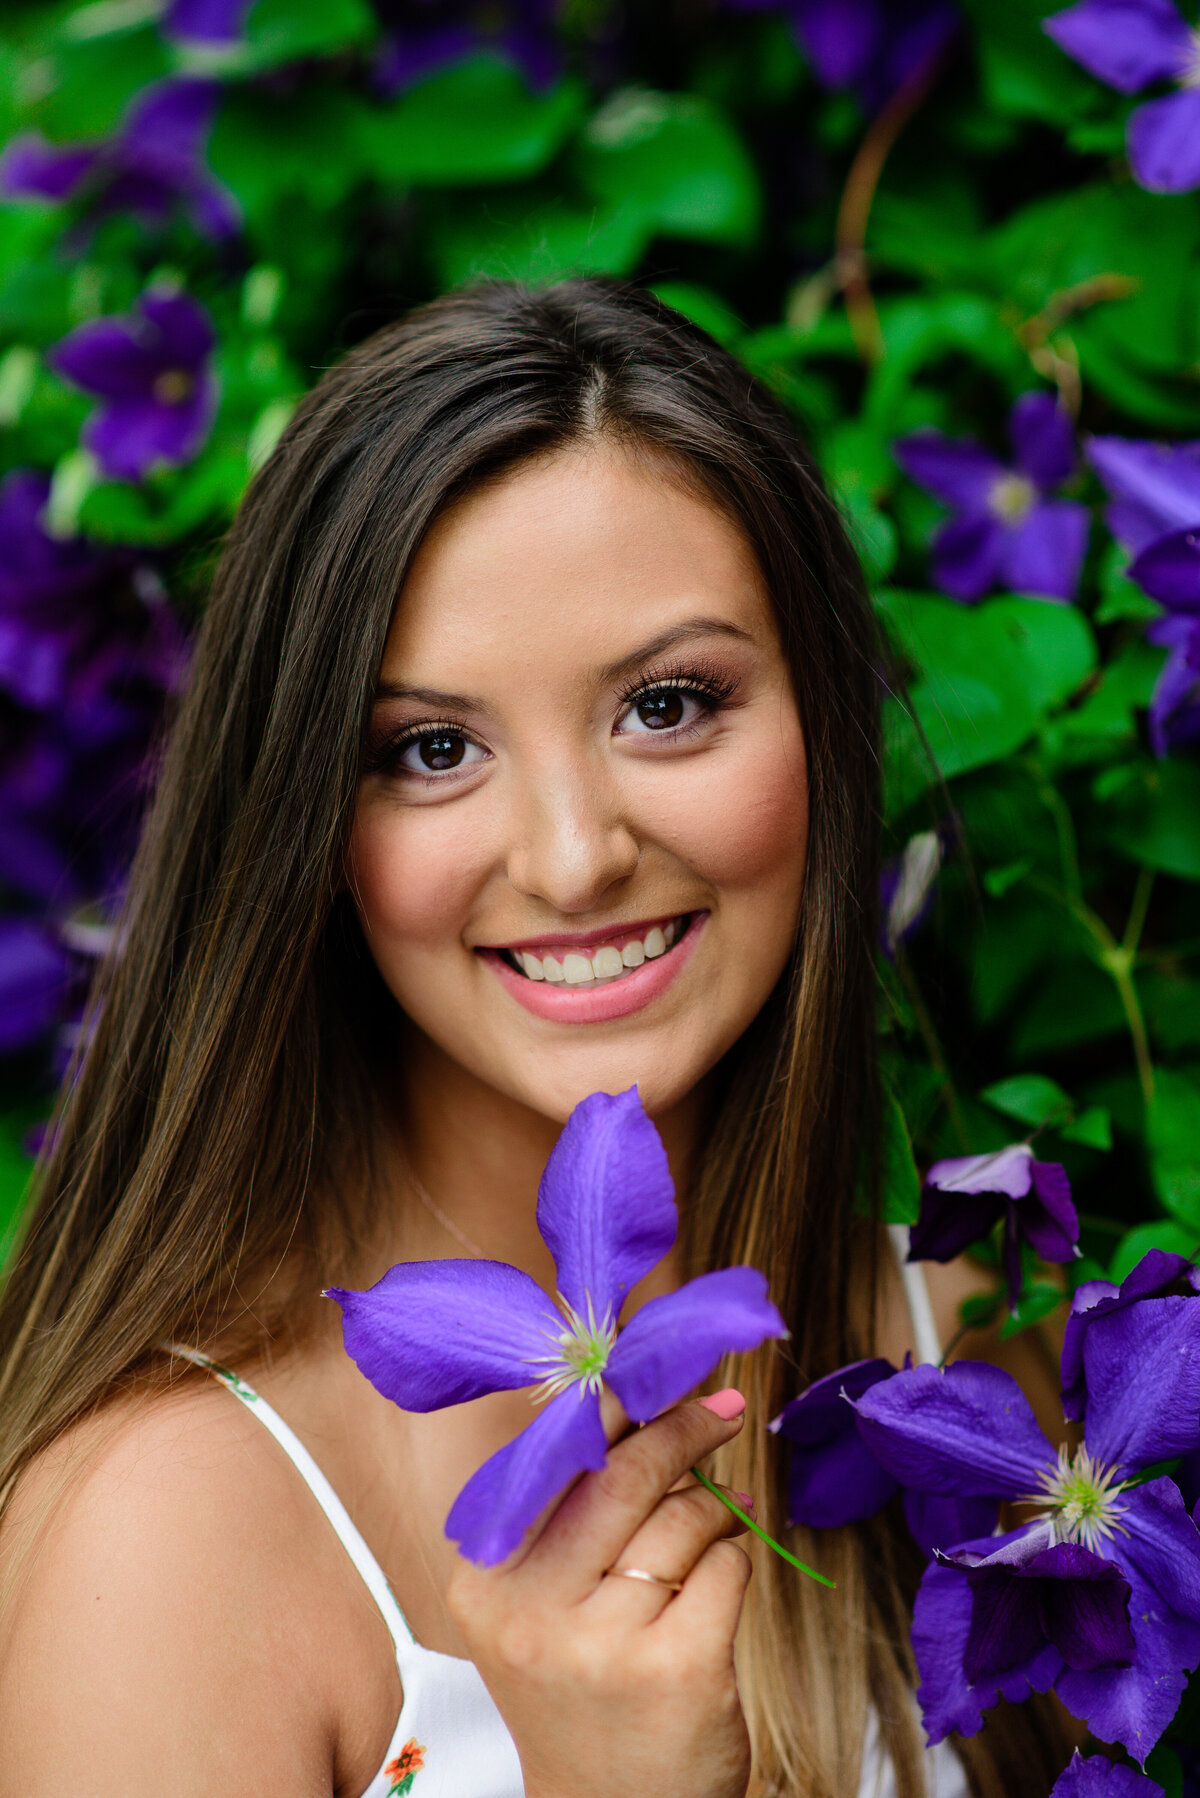 senior photos denver with girl posing with purple florals in a bush as she smiles and holds the flower to her face photographed by denver senior photographer